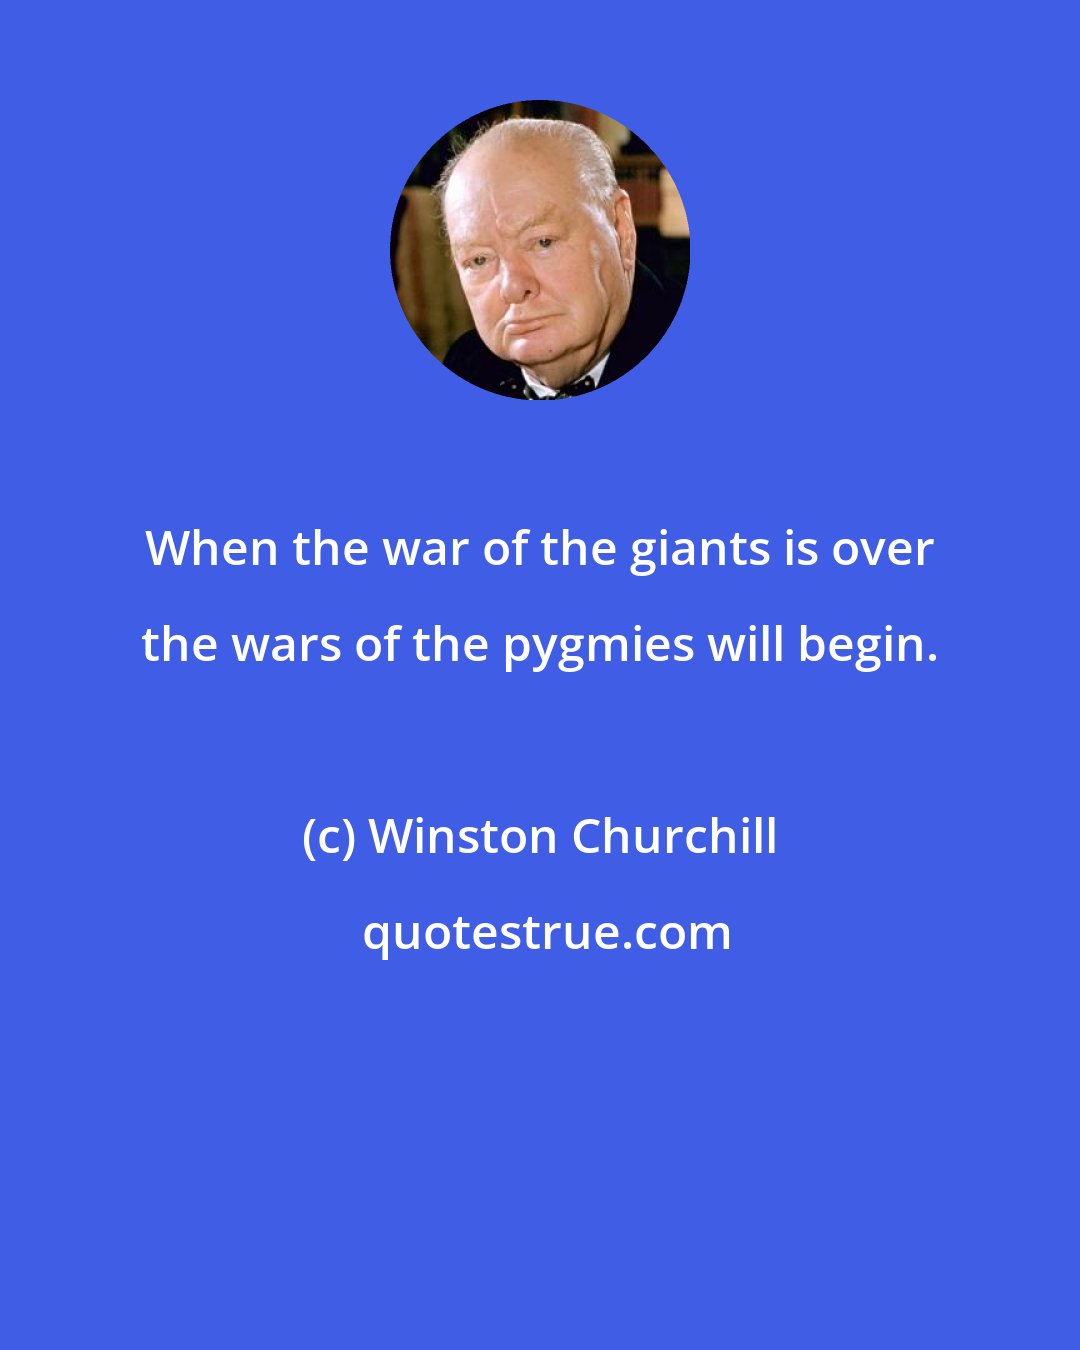 Winston Churchill: When the war of the giants is over the wars of the pygmies will begin.